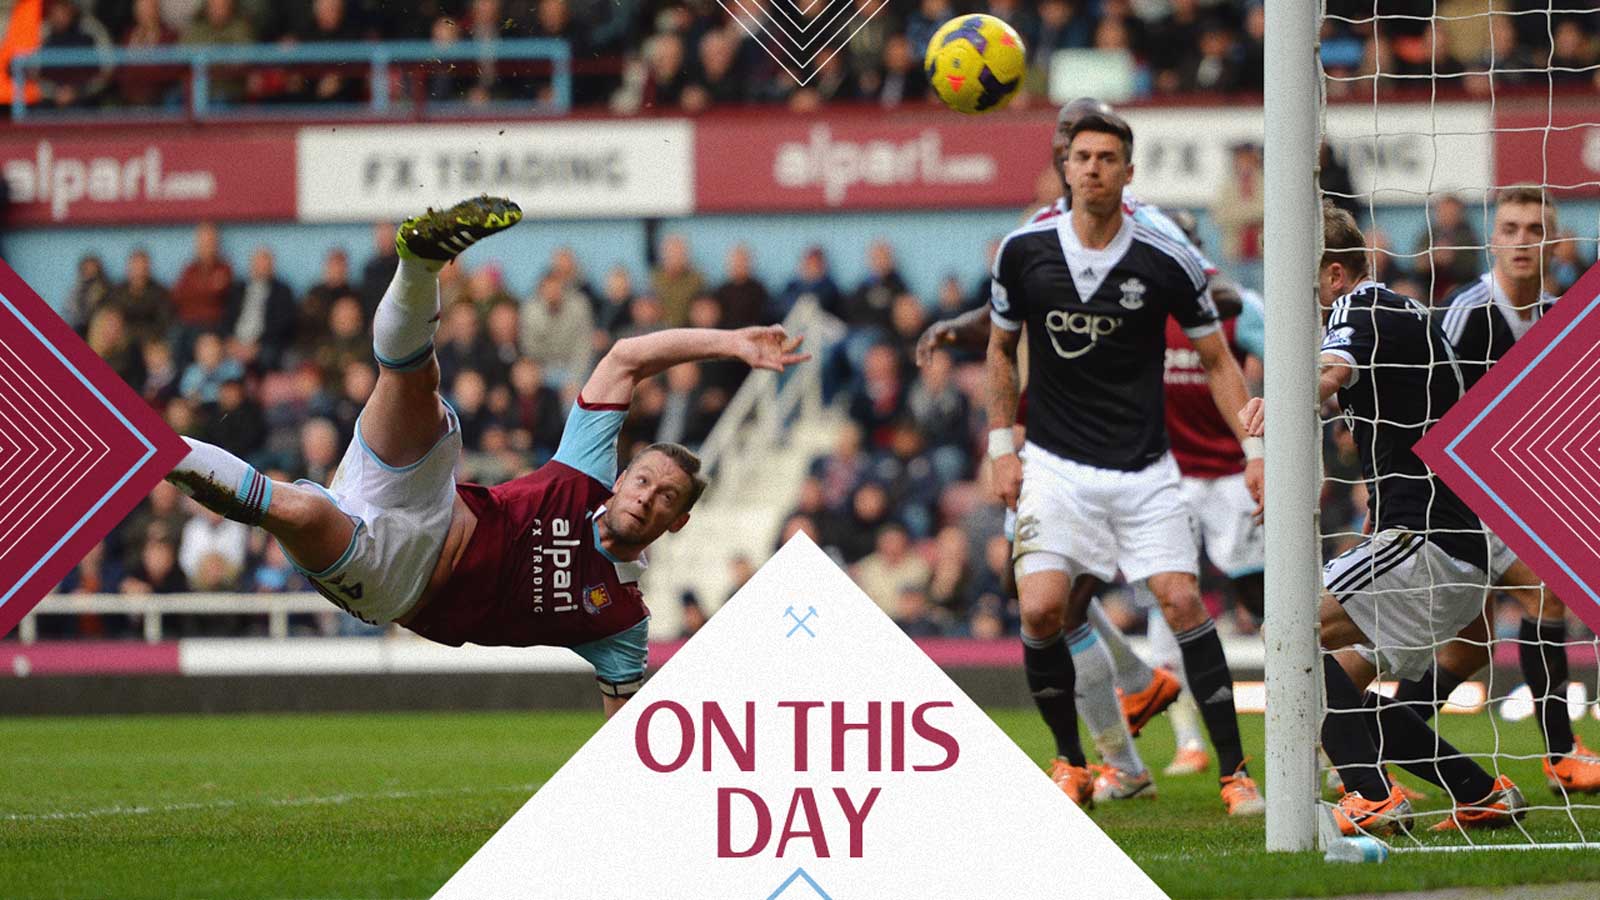 Kevin Nolan scores against Southampton in February 2014